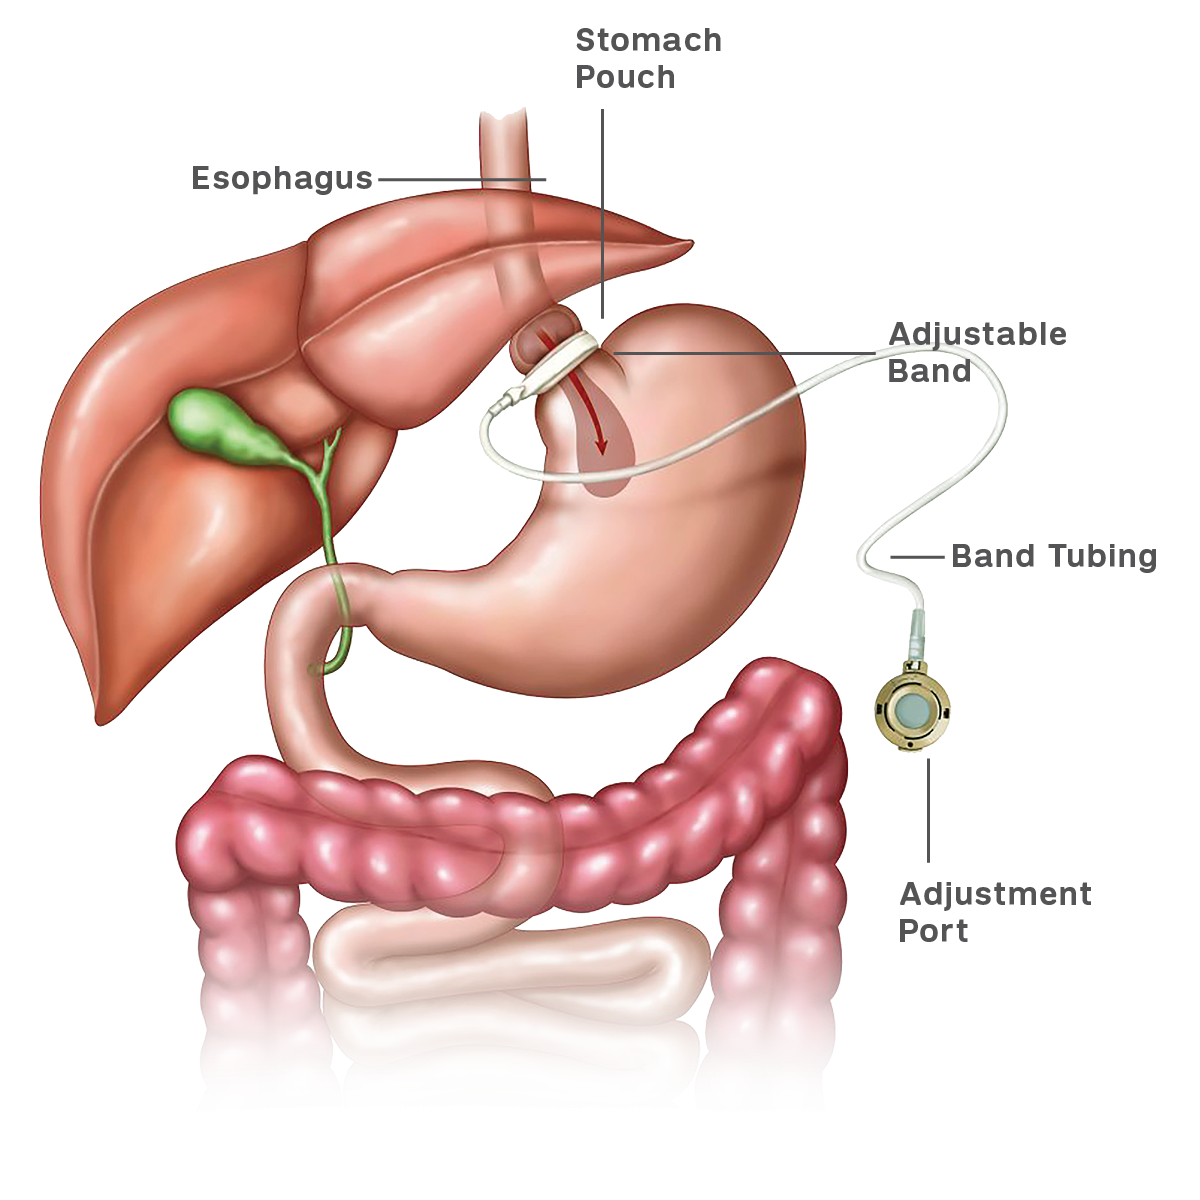 Illustration that shows how a gastric band works